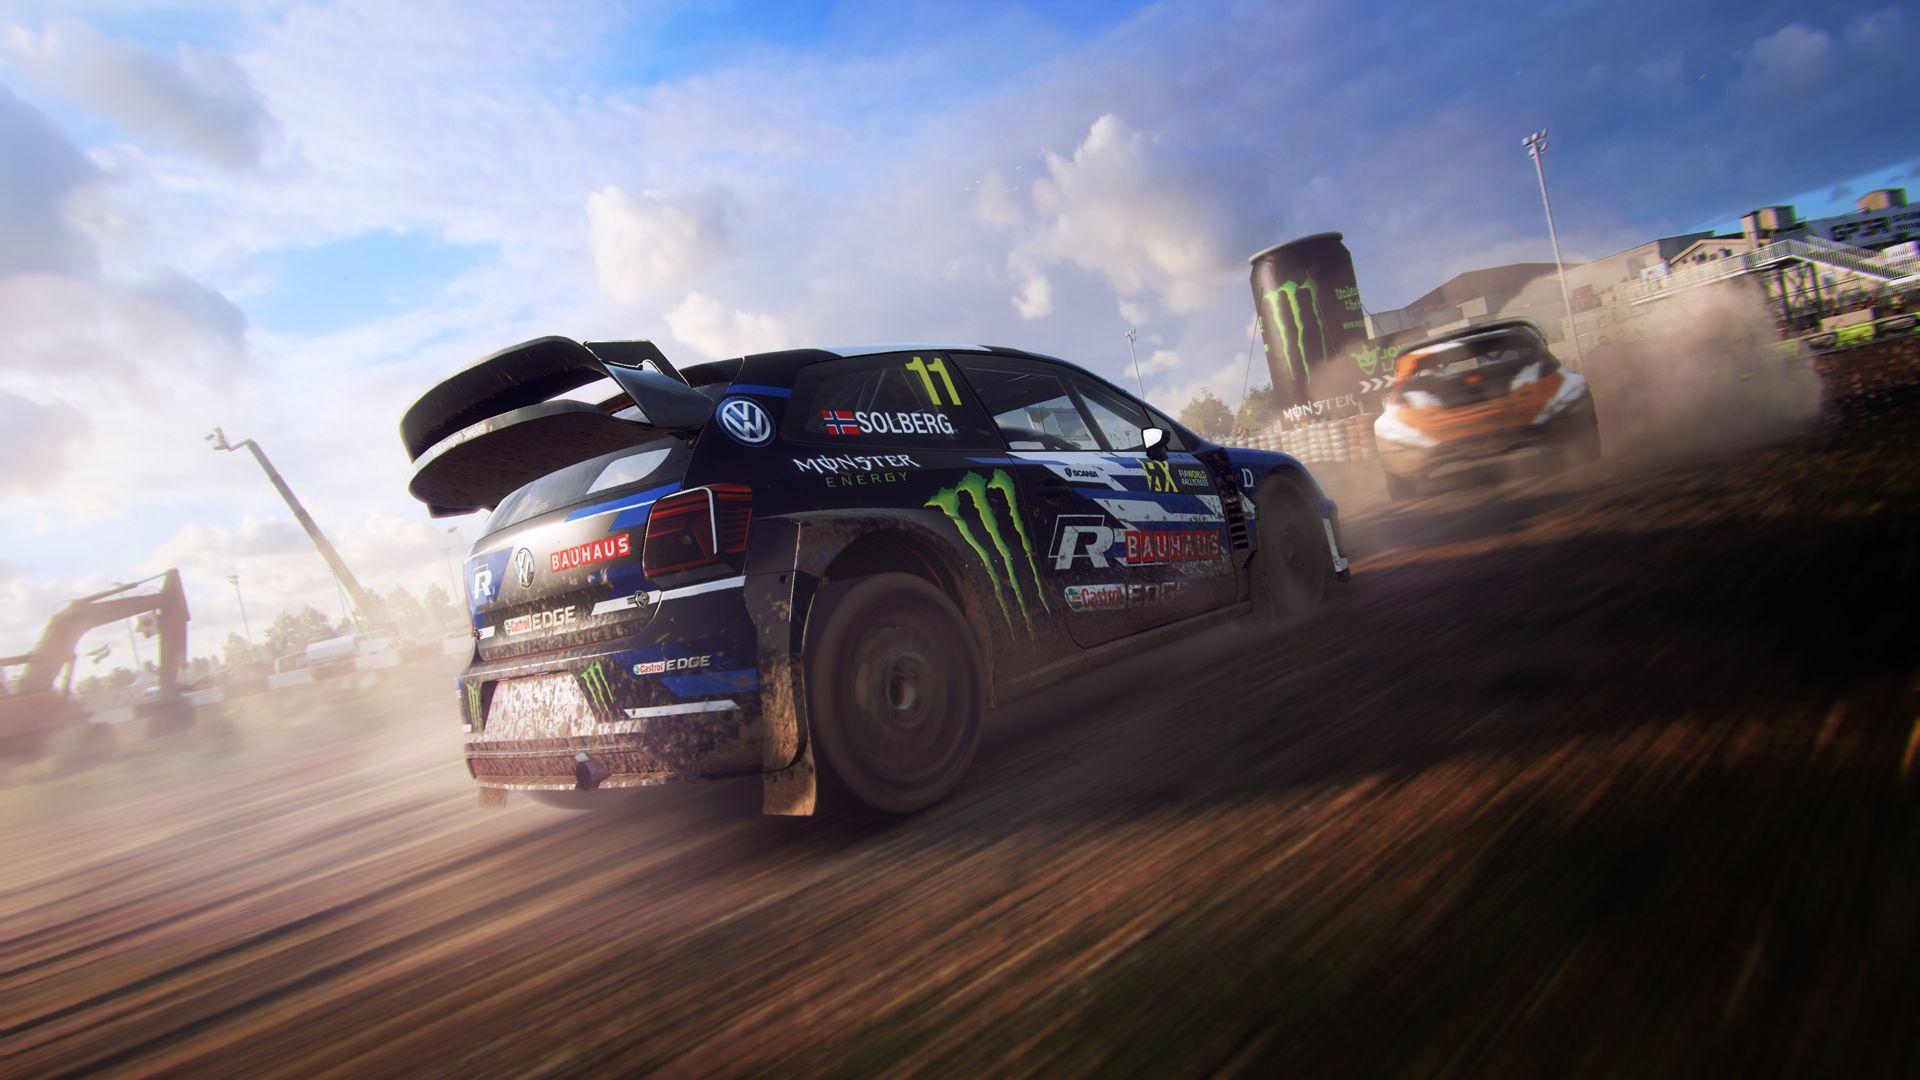 dirt rally 2.0 wallpaper hd 4 pc games archive on dirt rally 20 wallpapers